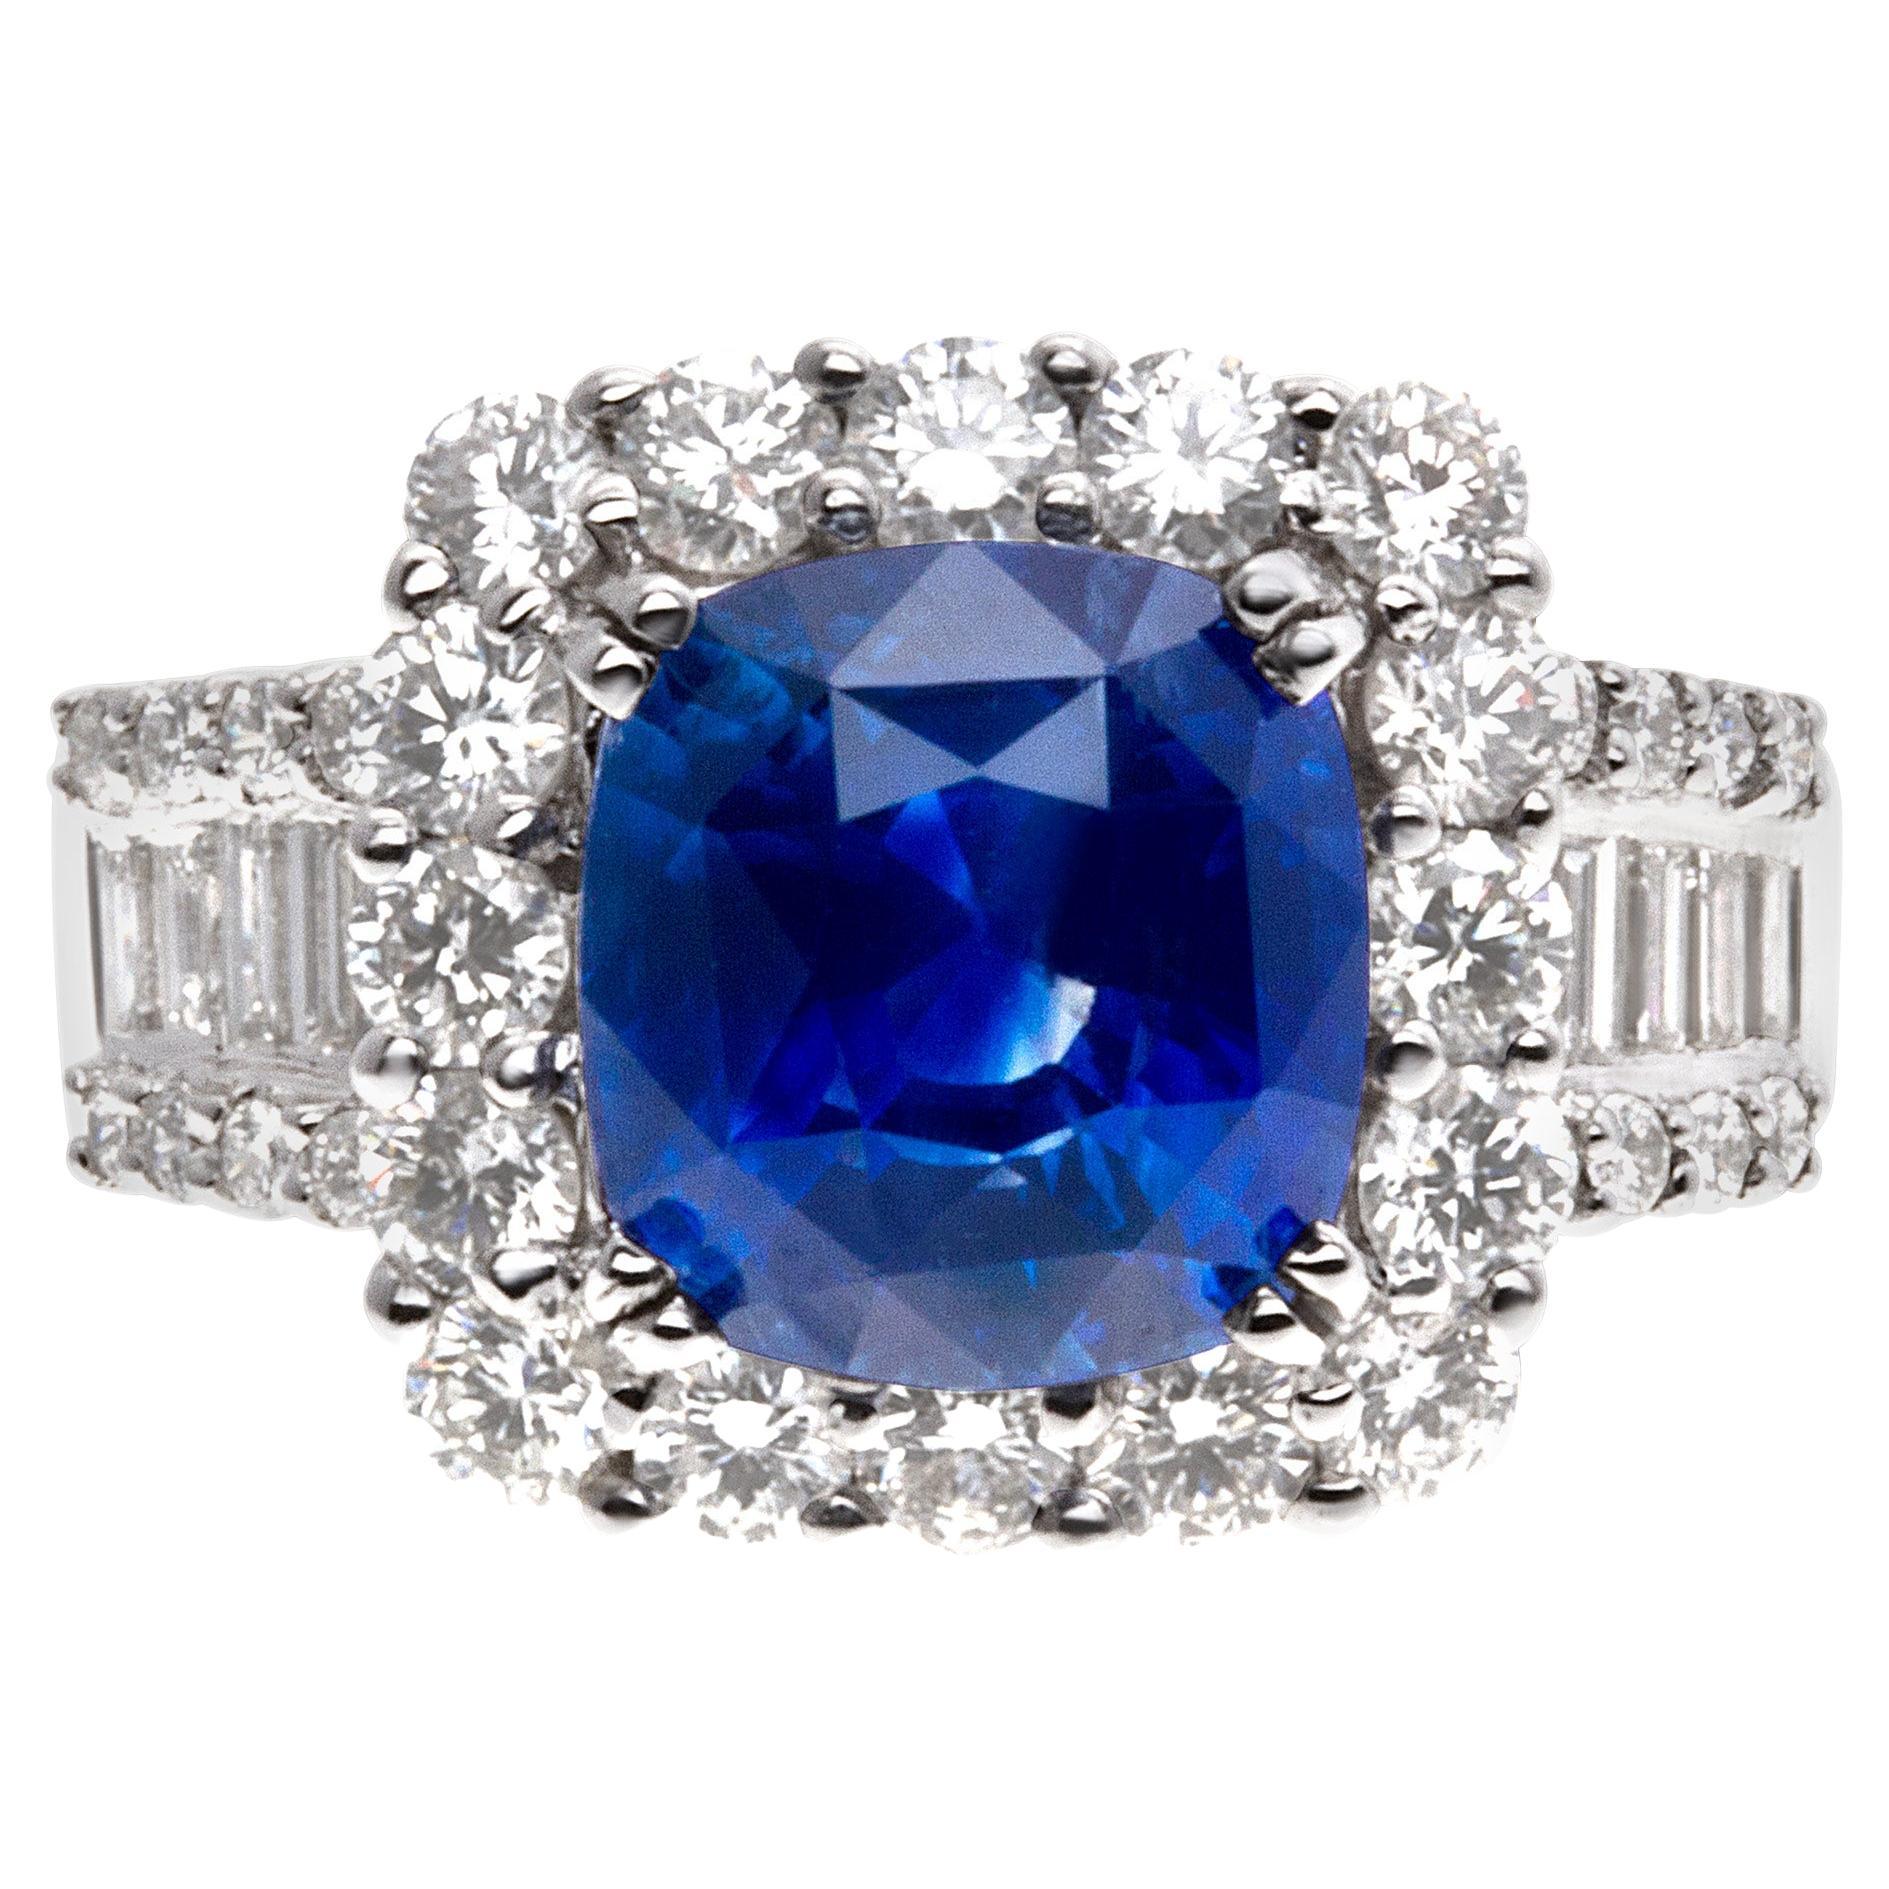 Sparkling 5.73 carat blue sapphire ring with diamond accents in 18k white gold For Sale